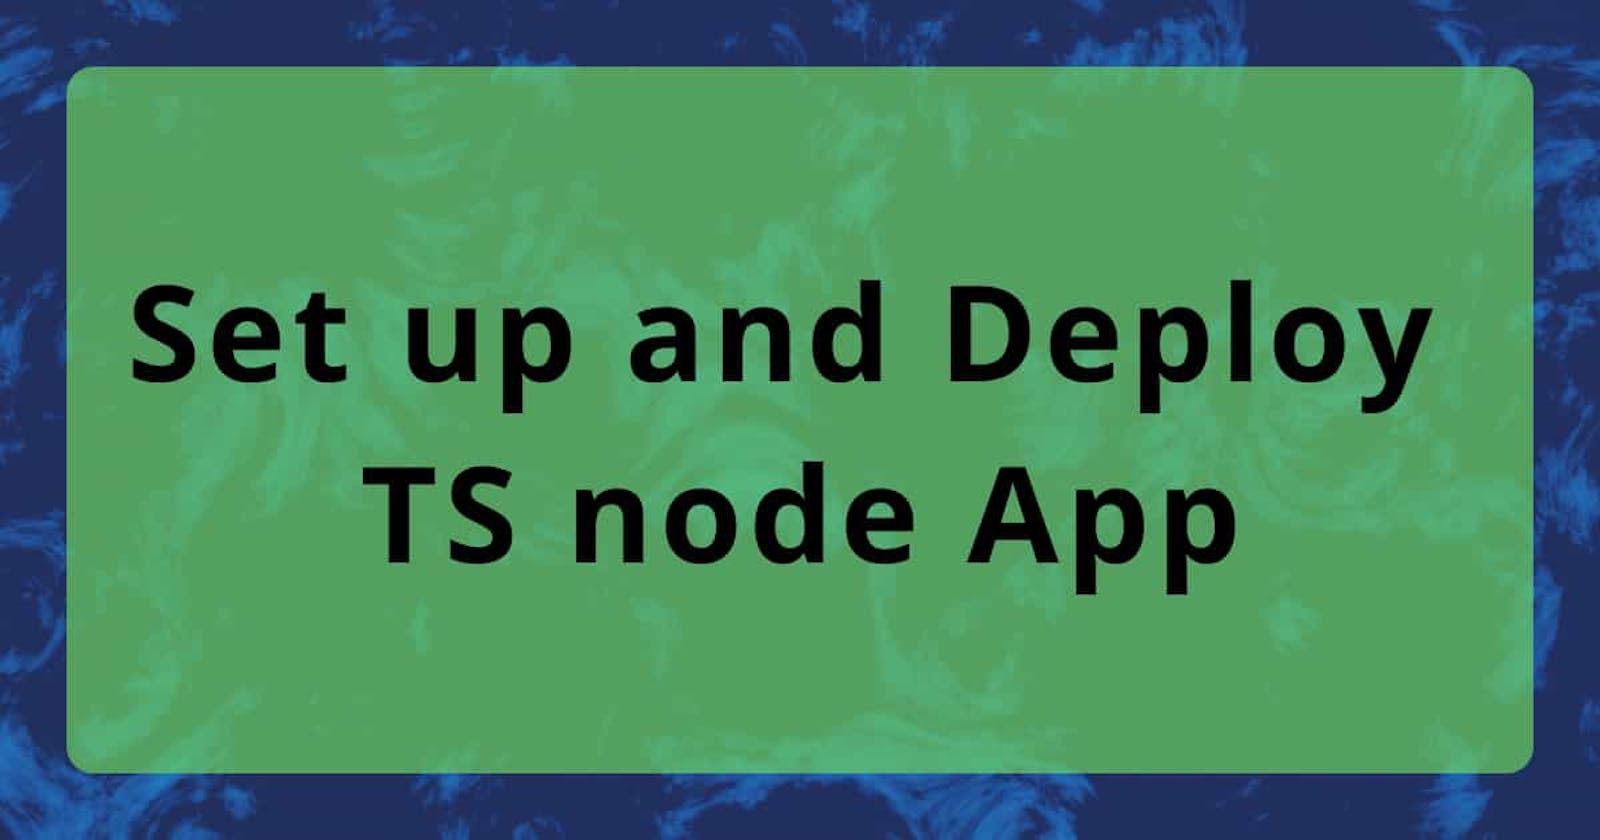 A Simple Guide to Set up and Deploy Node with TypeScript